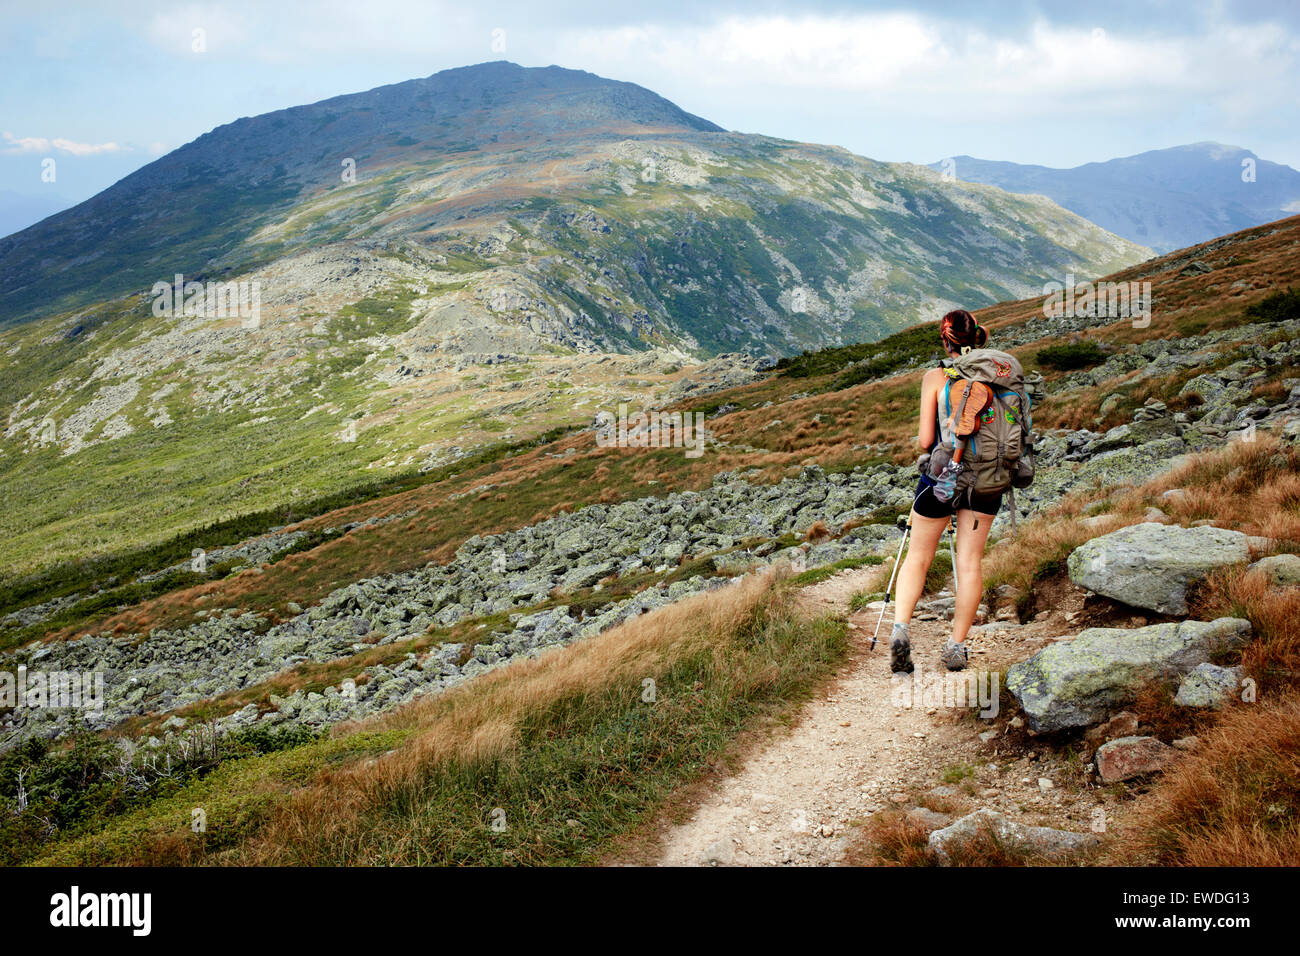 A hiker on the Appalachian Trail in the White Mountains. Stock Photo